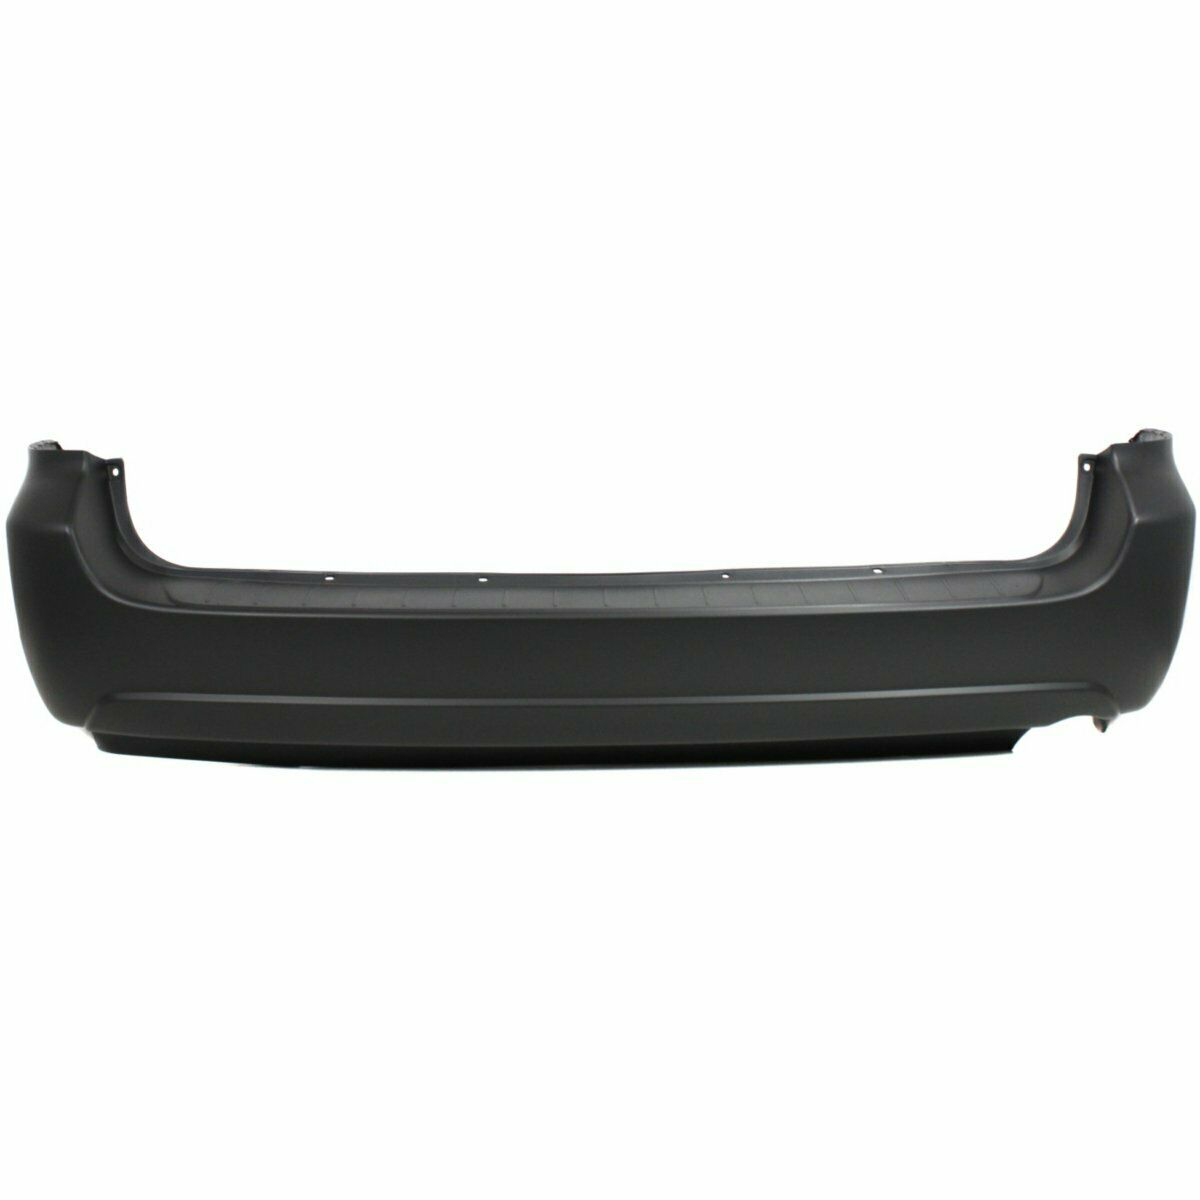 2010 Toyota Sienna w/o Sensors Rear Bumper Painted to Match